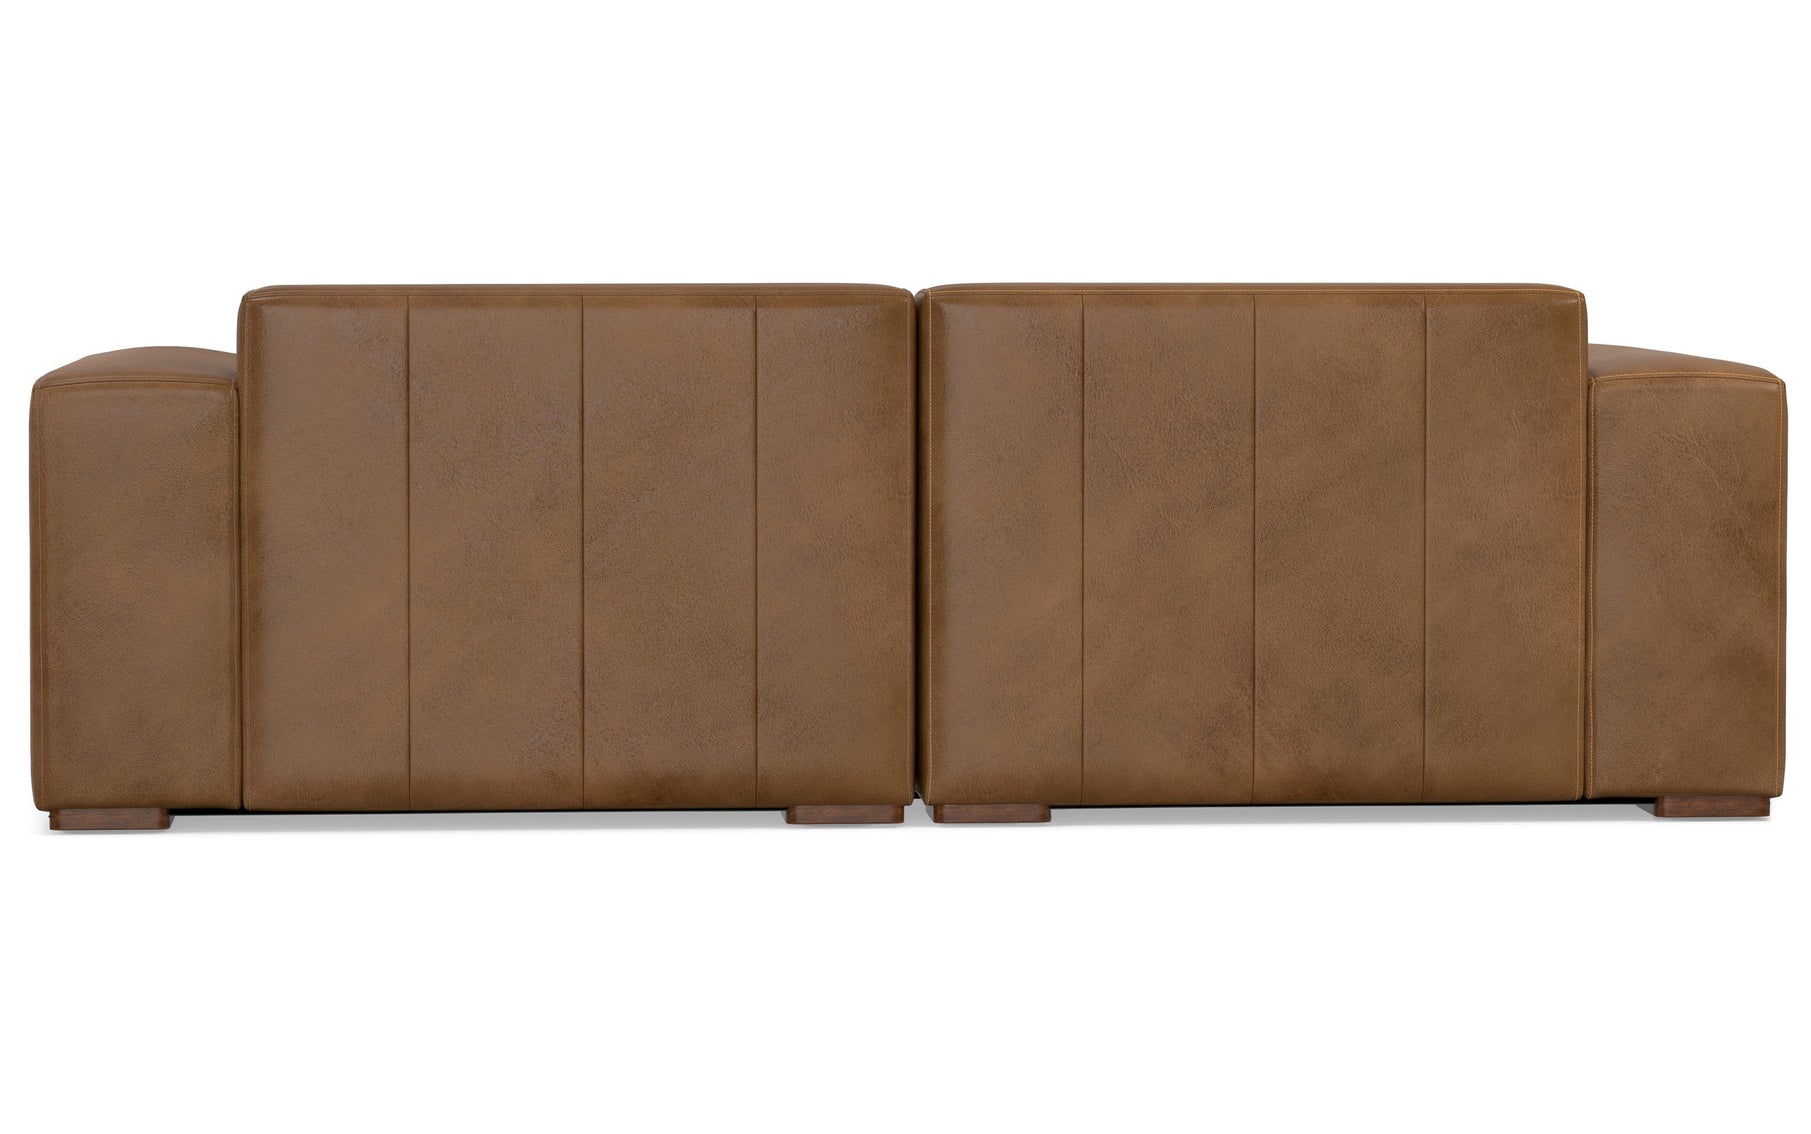 Caramel Brown Genuine Leather | Rex 2 Seater Sofa and Ottoman in Genuine Leather